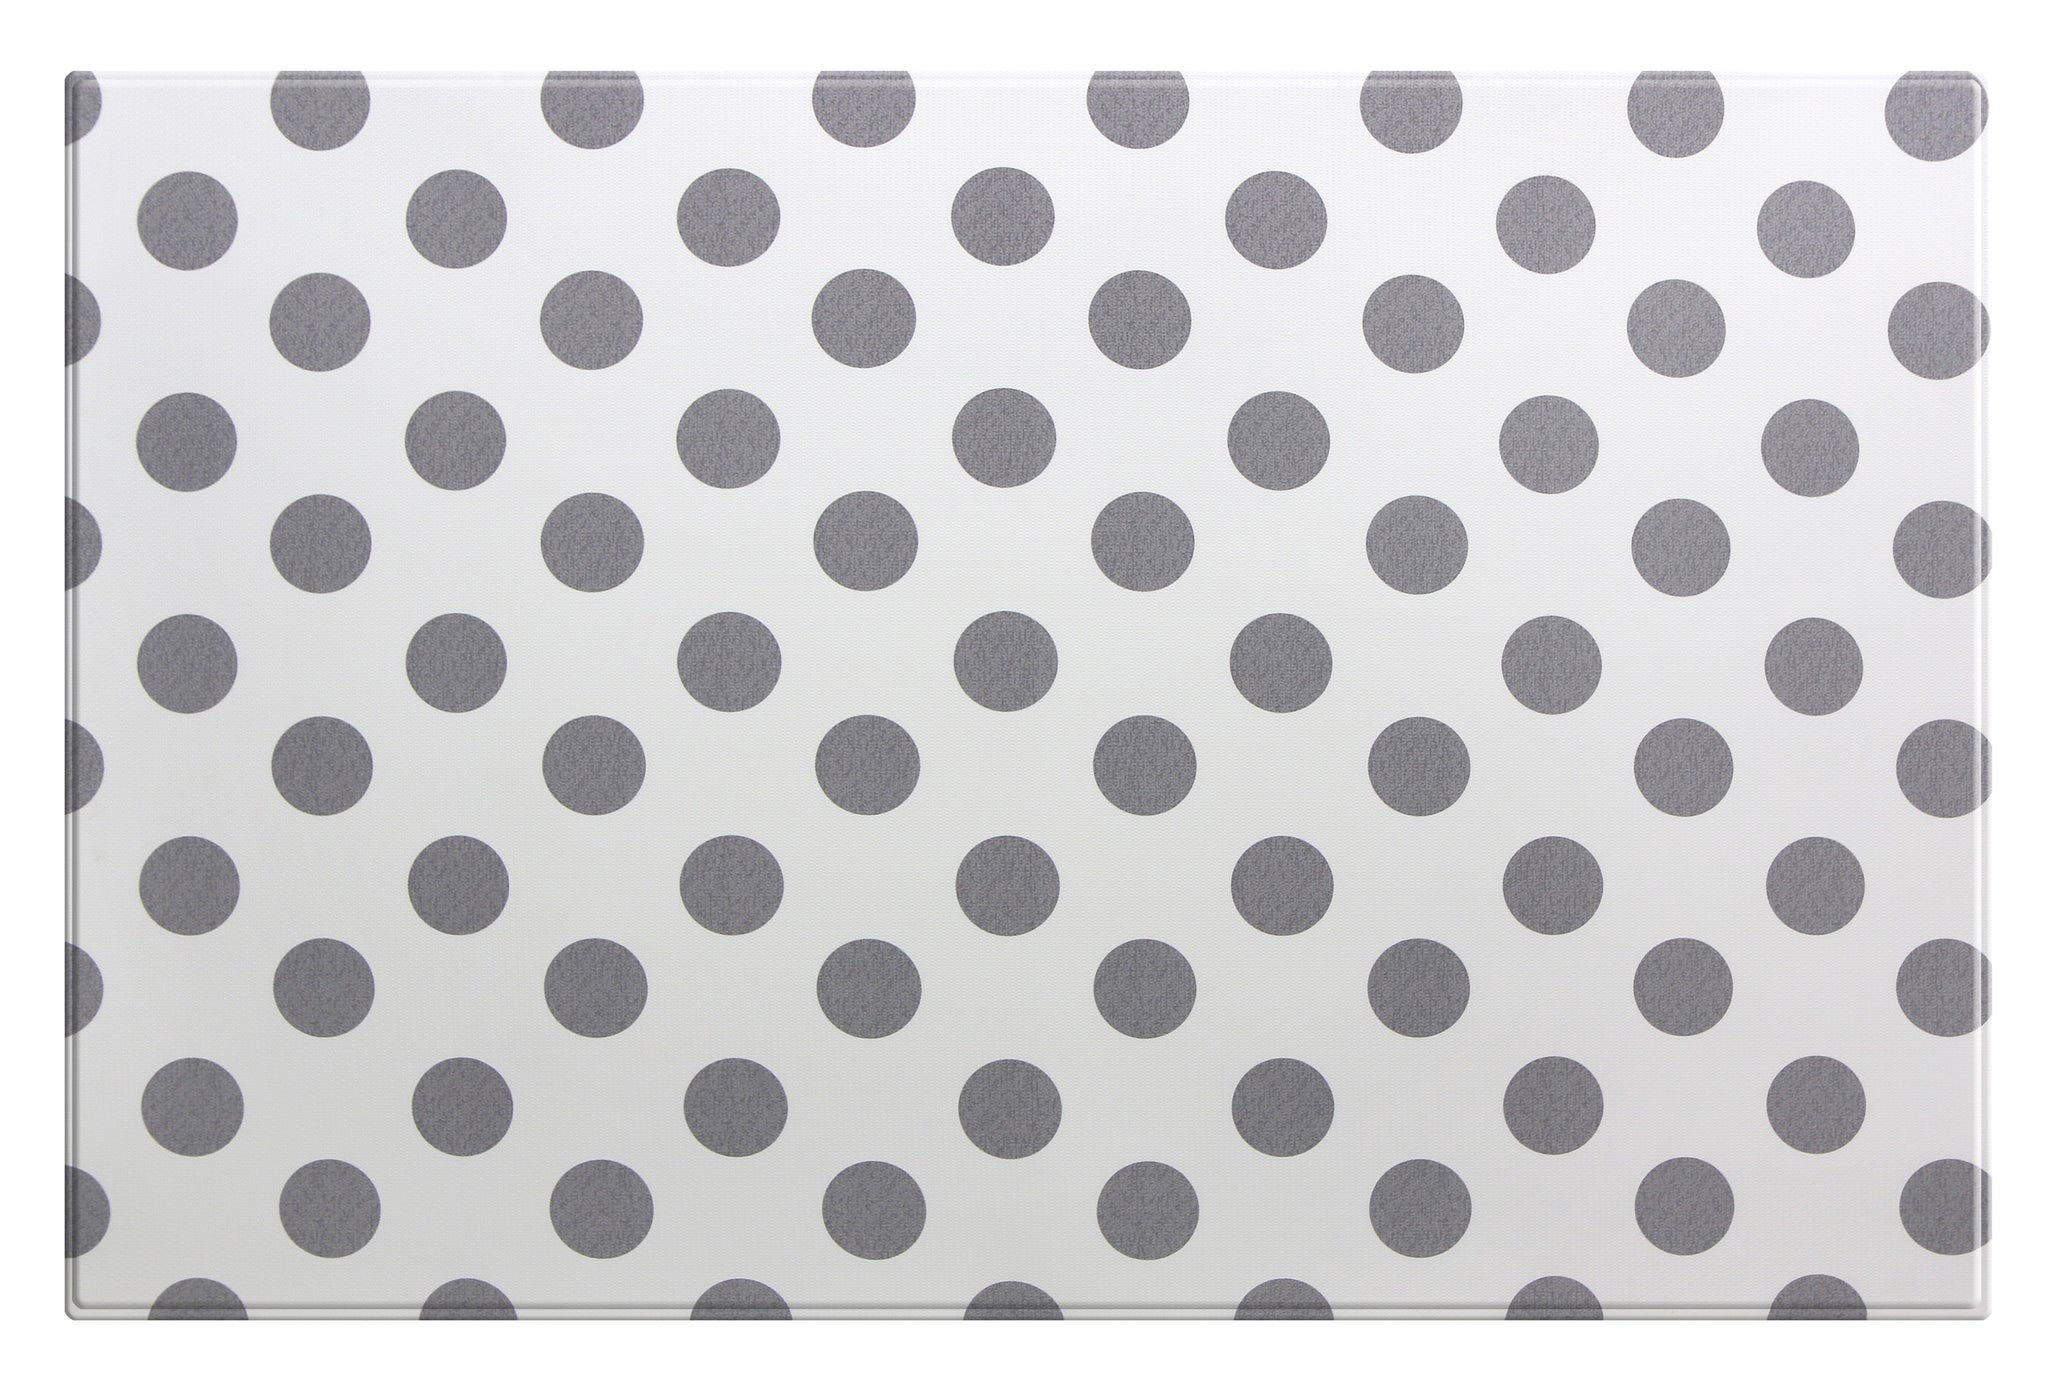 BABYCARE Playmat - Dots and Stars